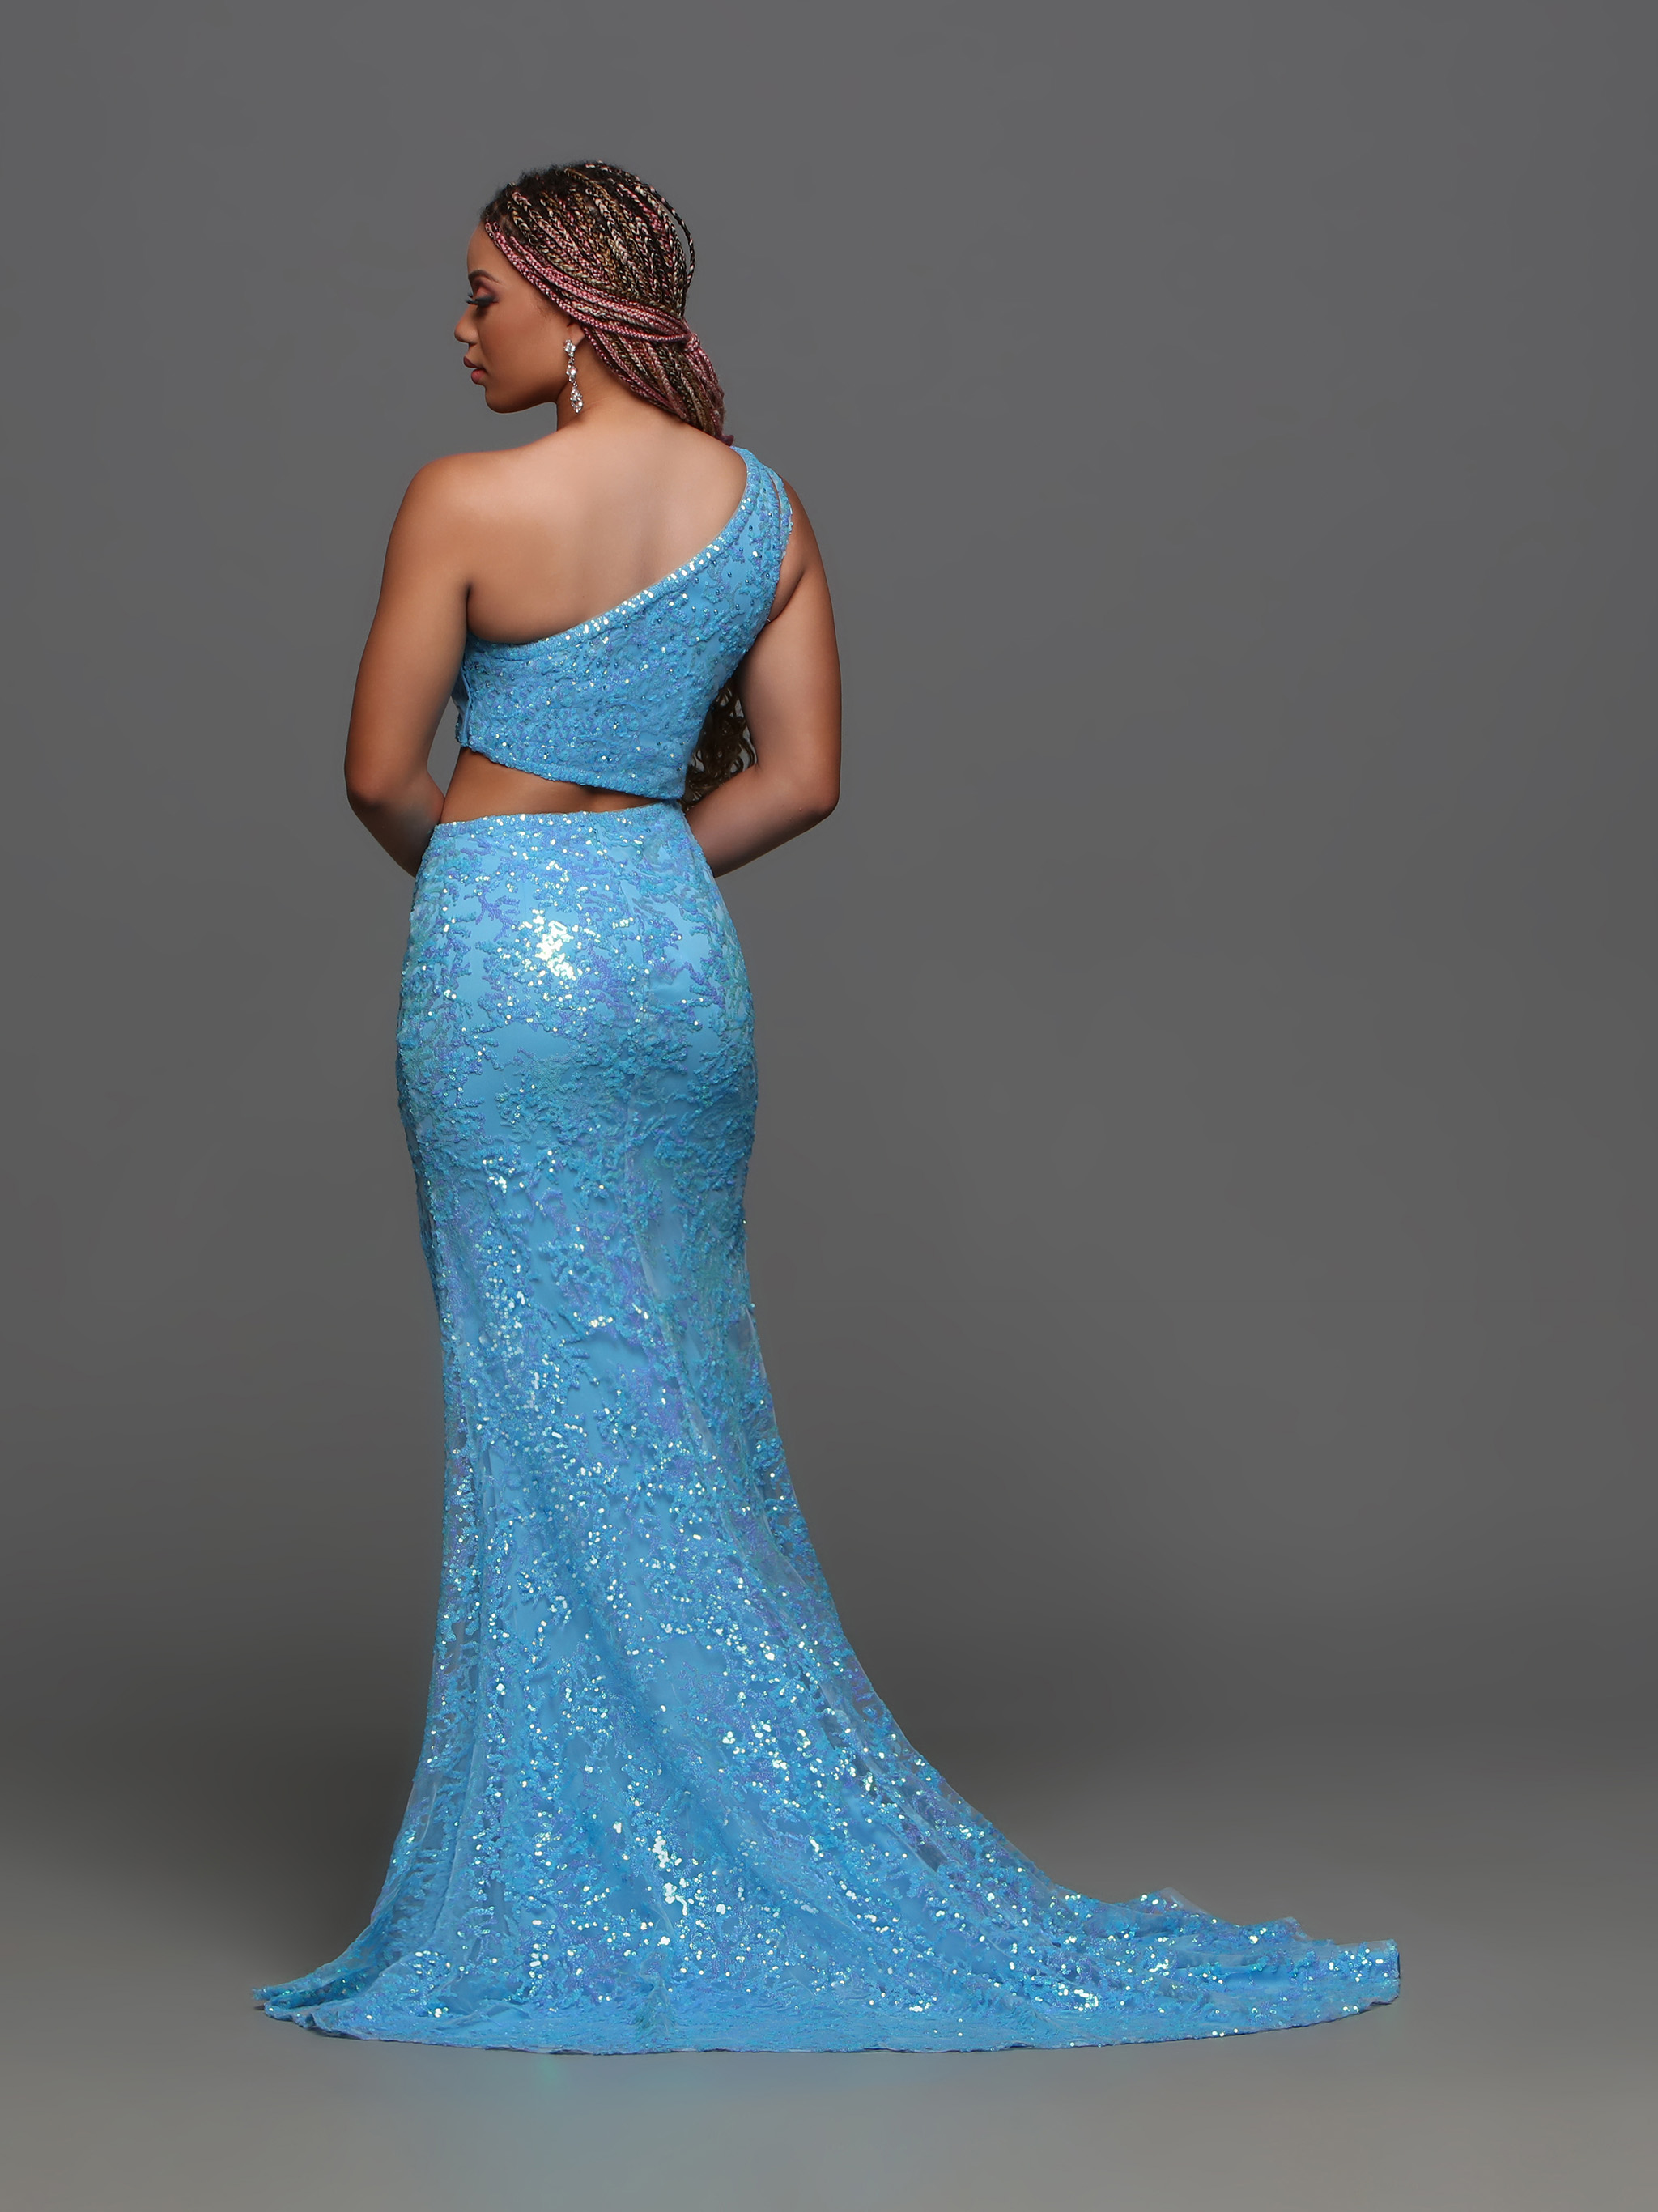 Image showing back view of style #72389